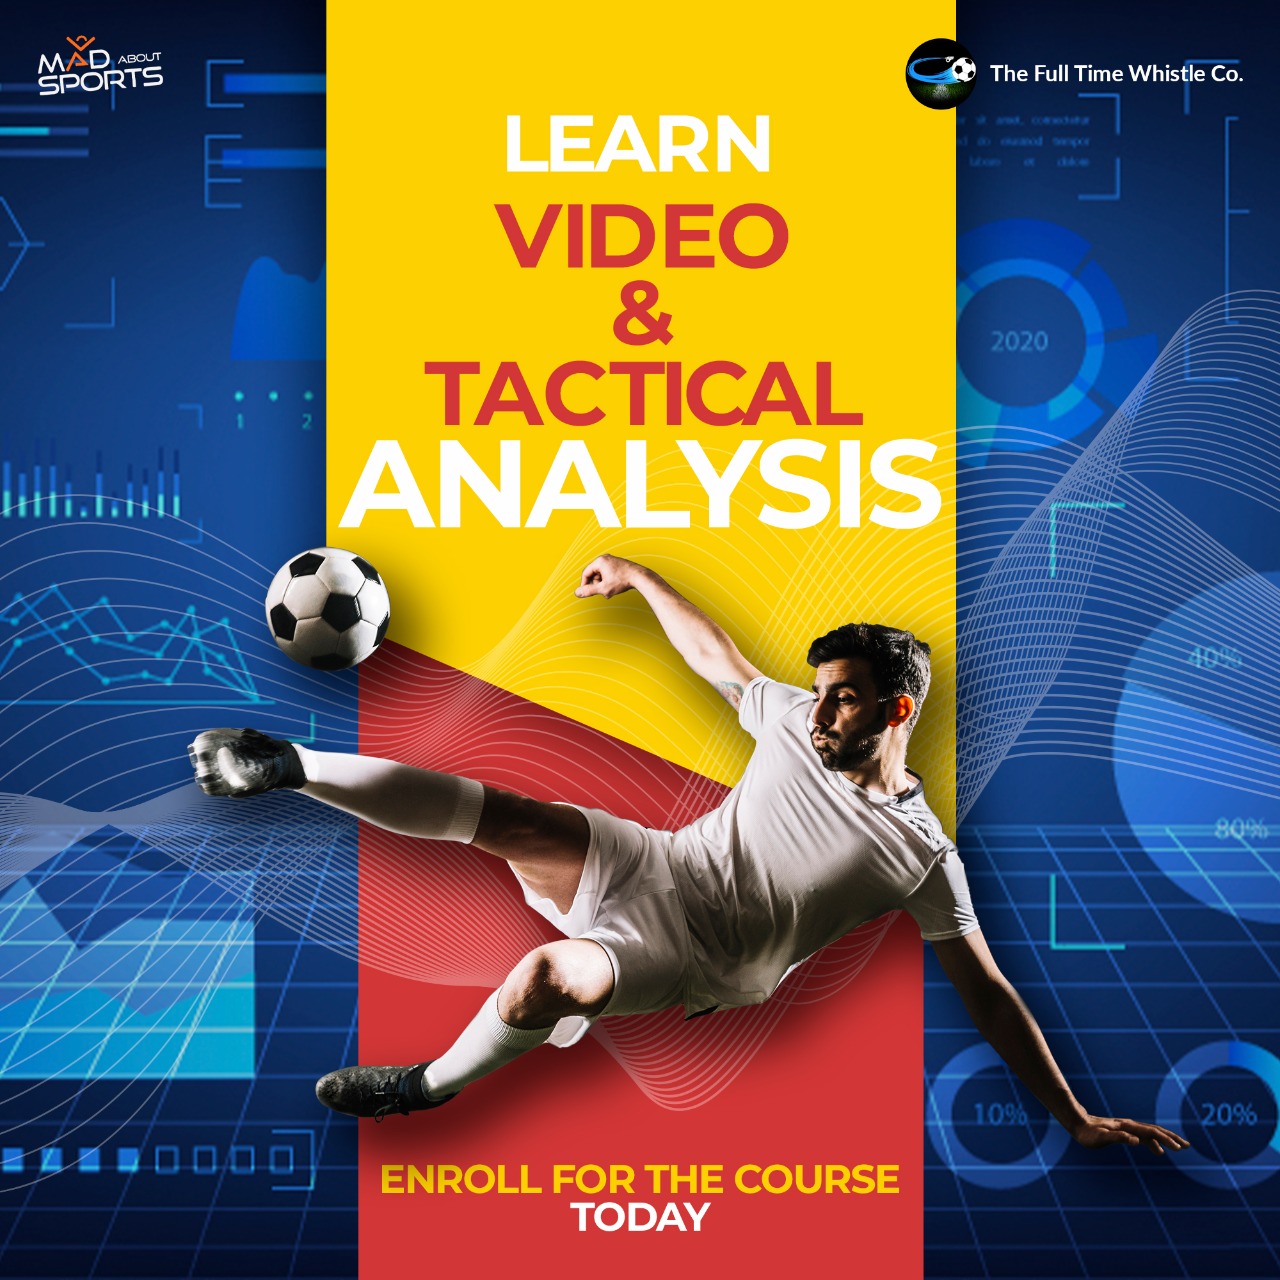 The Role Of A Video Analyst At The Top Level – Learn Football Video & Tactical Analysis On Mad About Sports